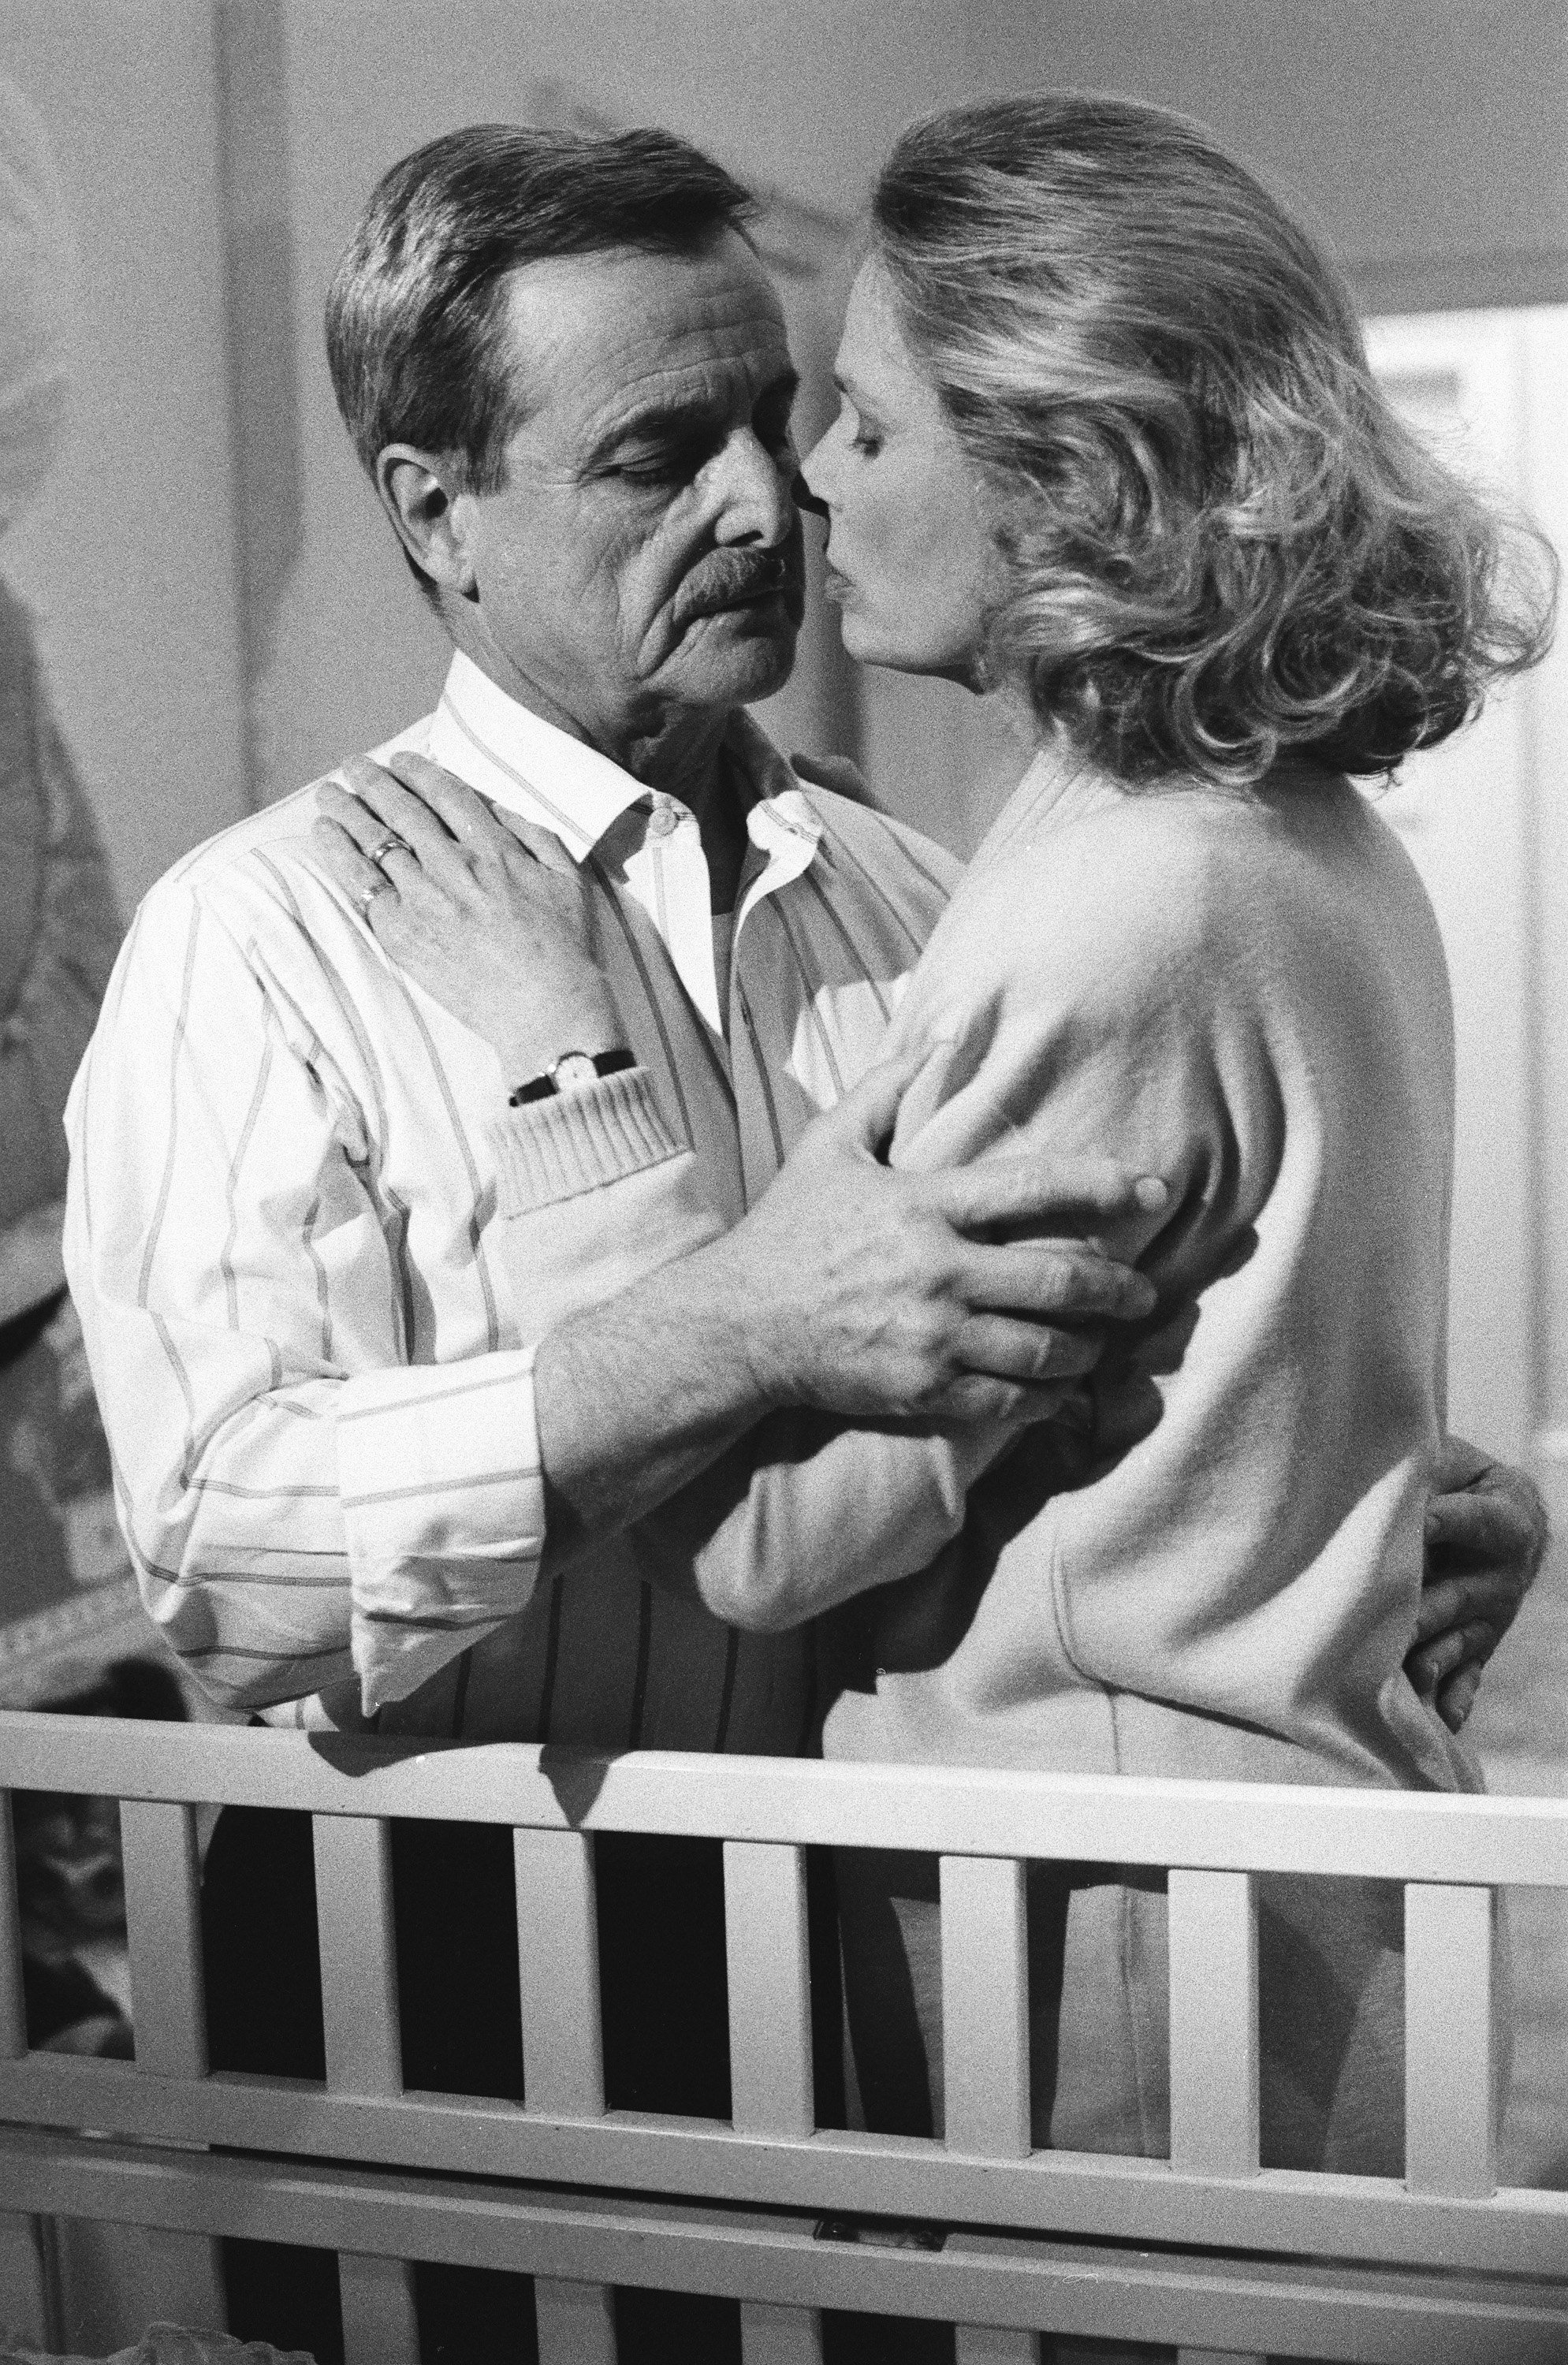 William Daniels as Dr. Mark Craig and Bonnie Bartlett as Ellen Craig in "St. Elsewhere" on May 20, 1987 | Source: Getty Images